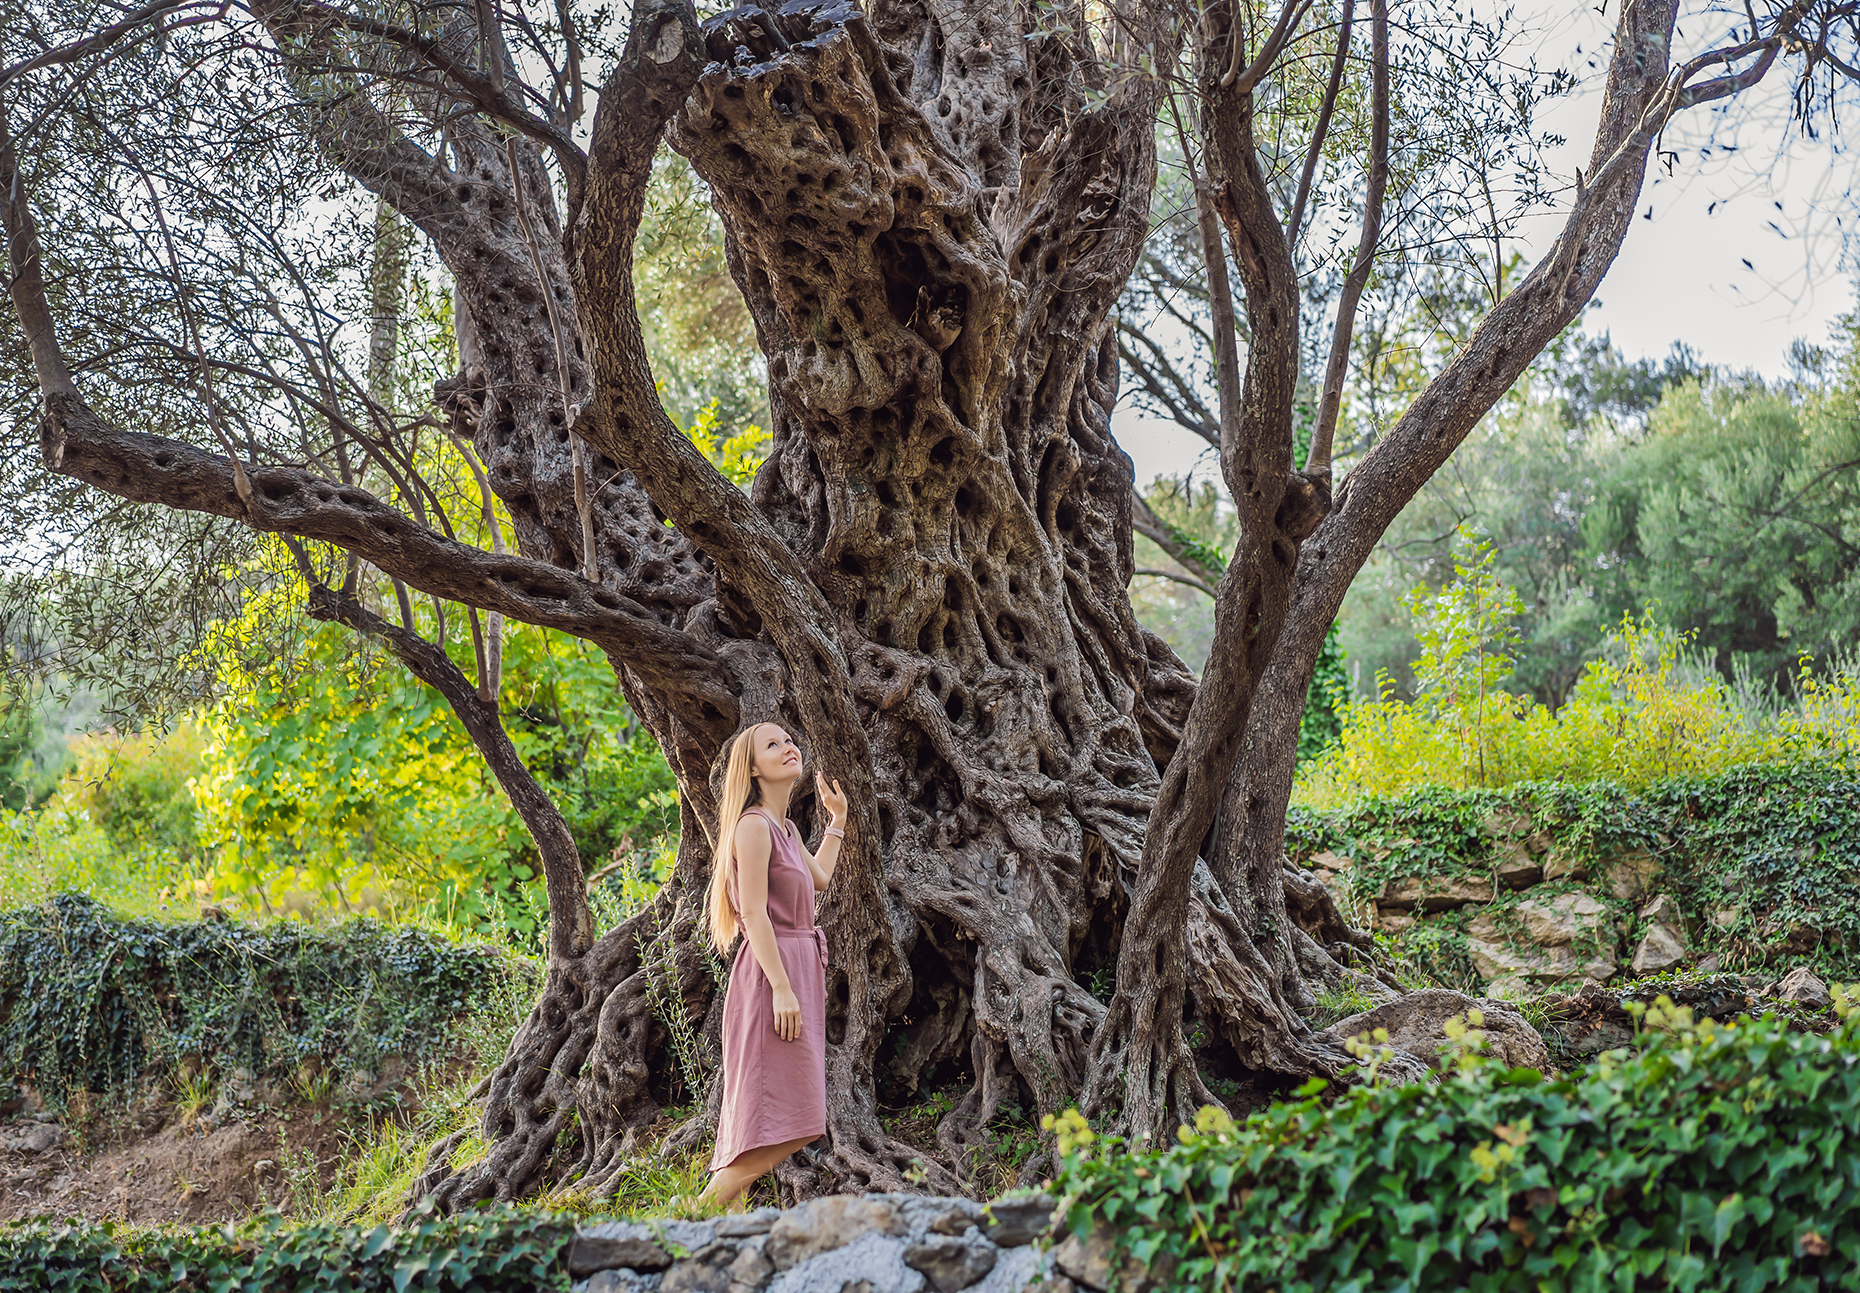 Have you hugged a tree today? Connect with your nature and find your center